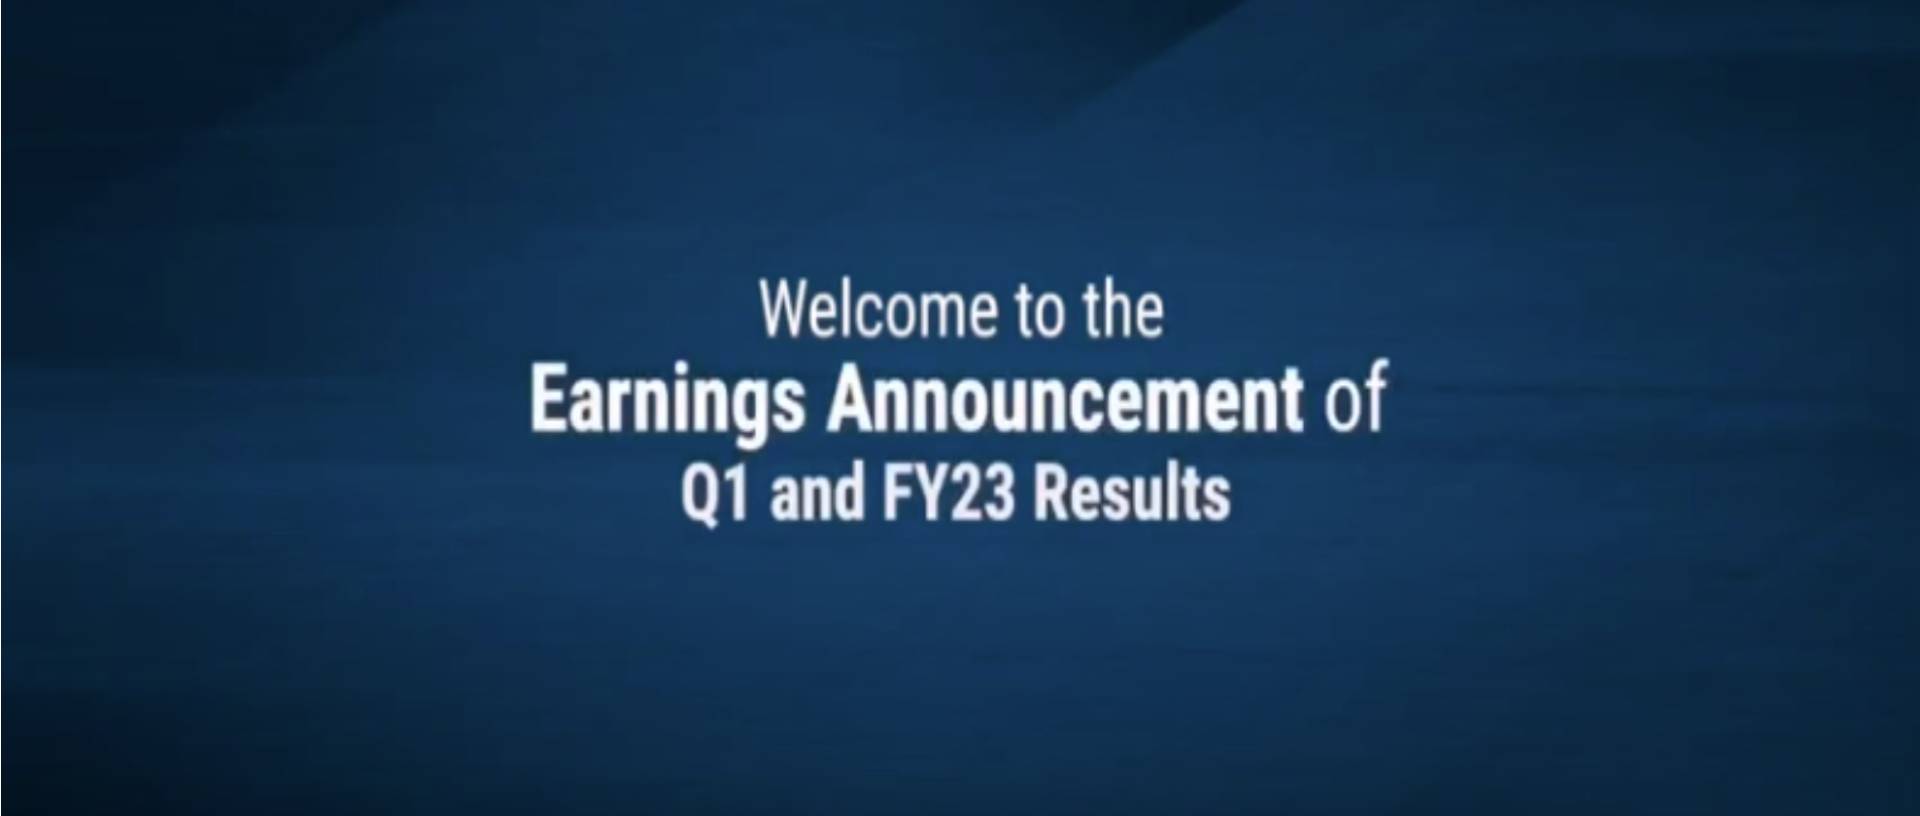 Q1 FY 23 Results Earnings Announcement